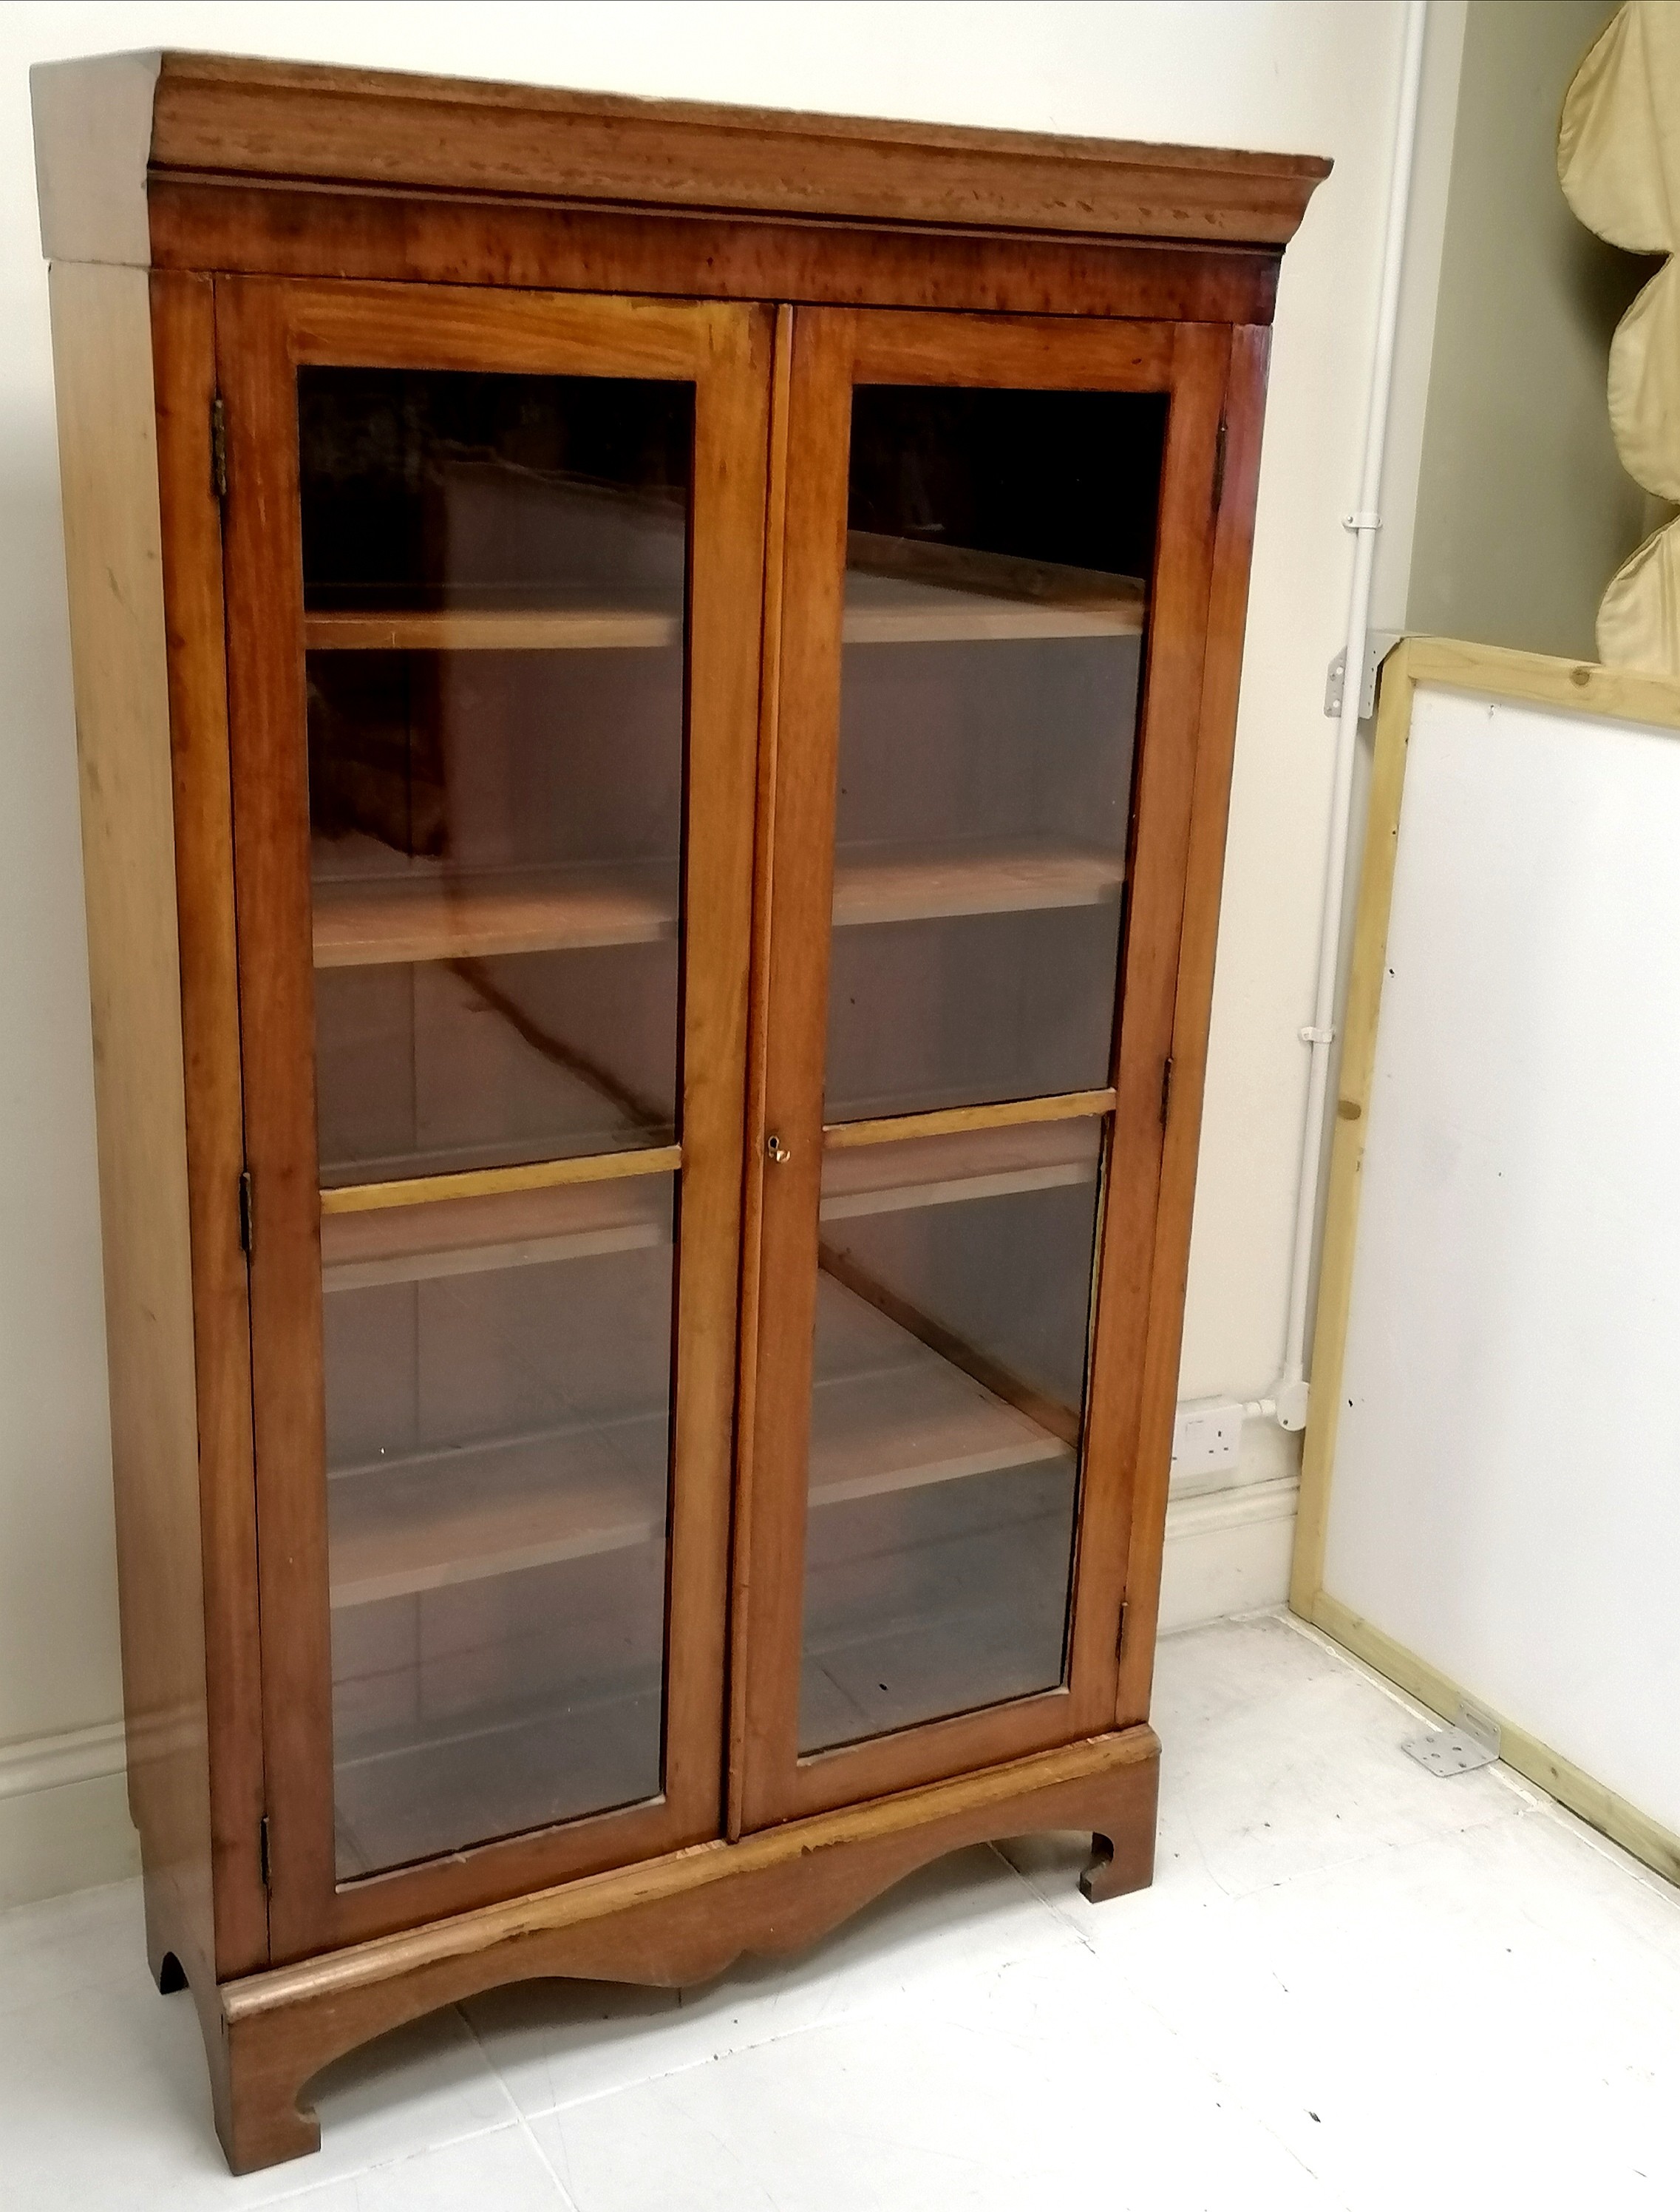 Antique mahogany 2 door glazed 4 shelf bookcase, on bracket feet, in used condition, 100 cm wide x - Image 5 of 5